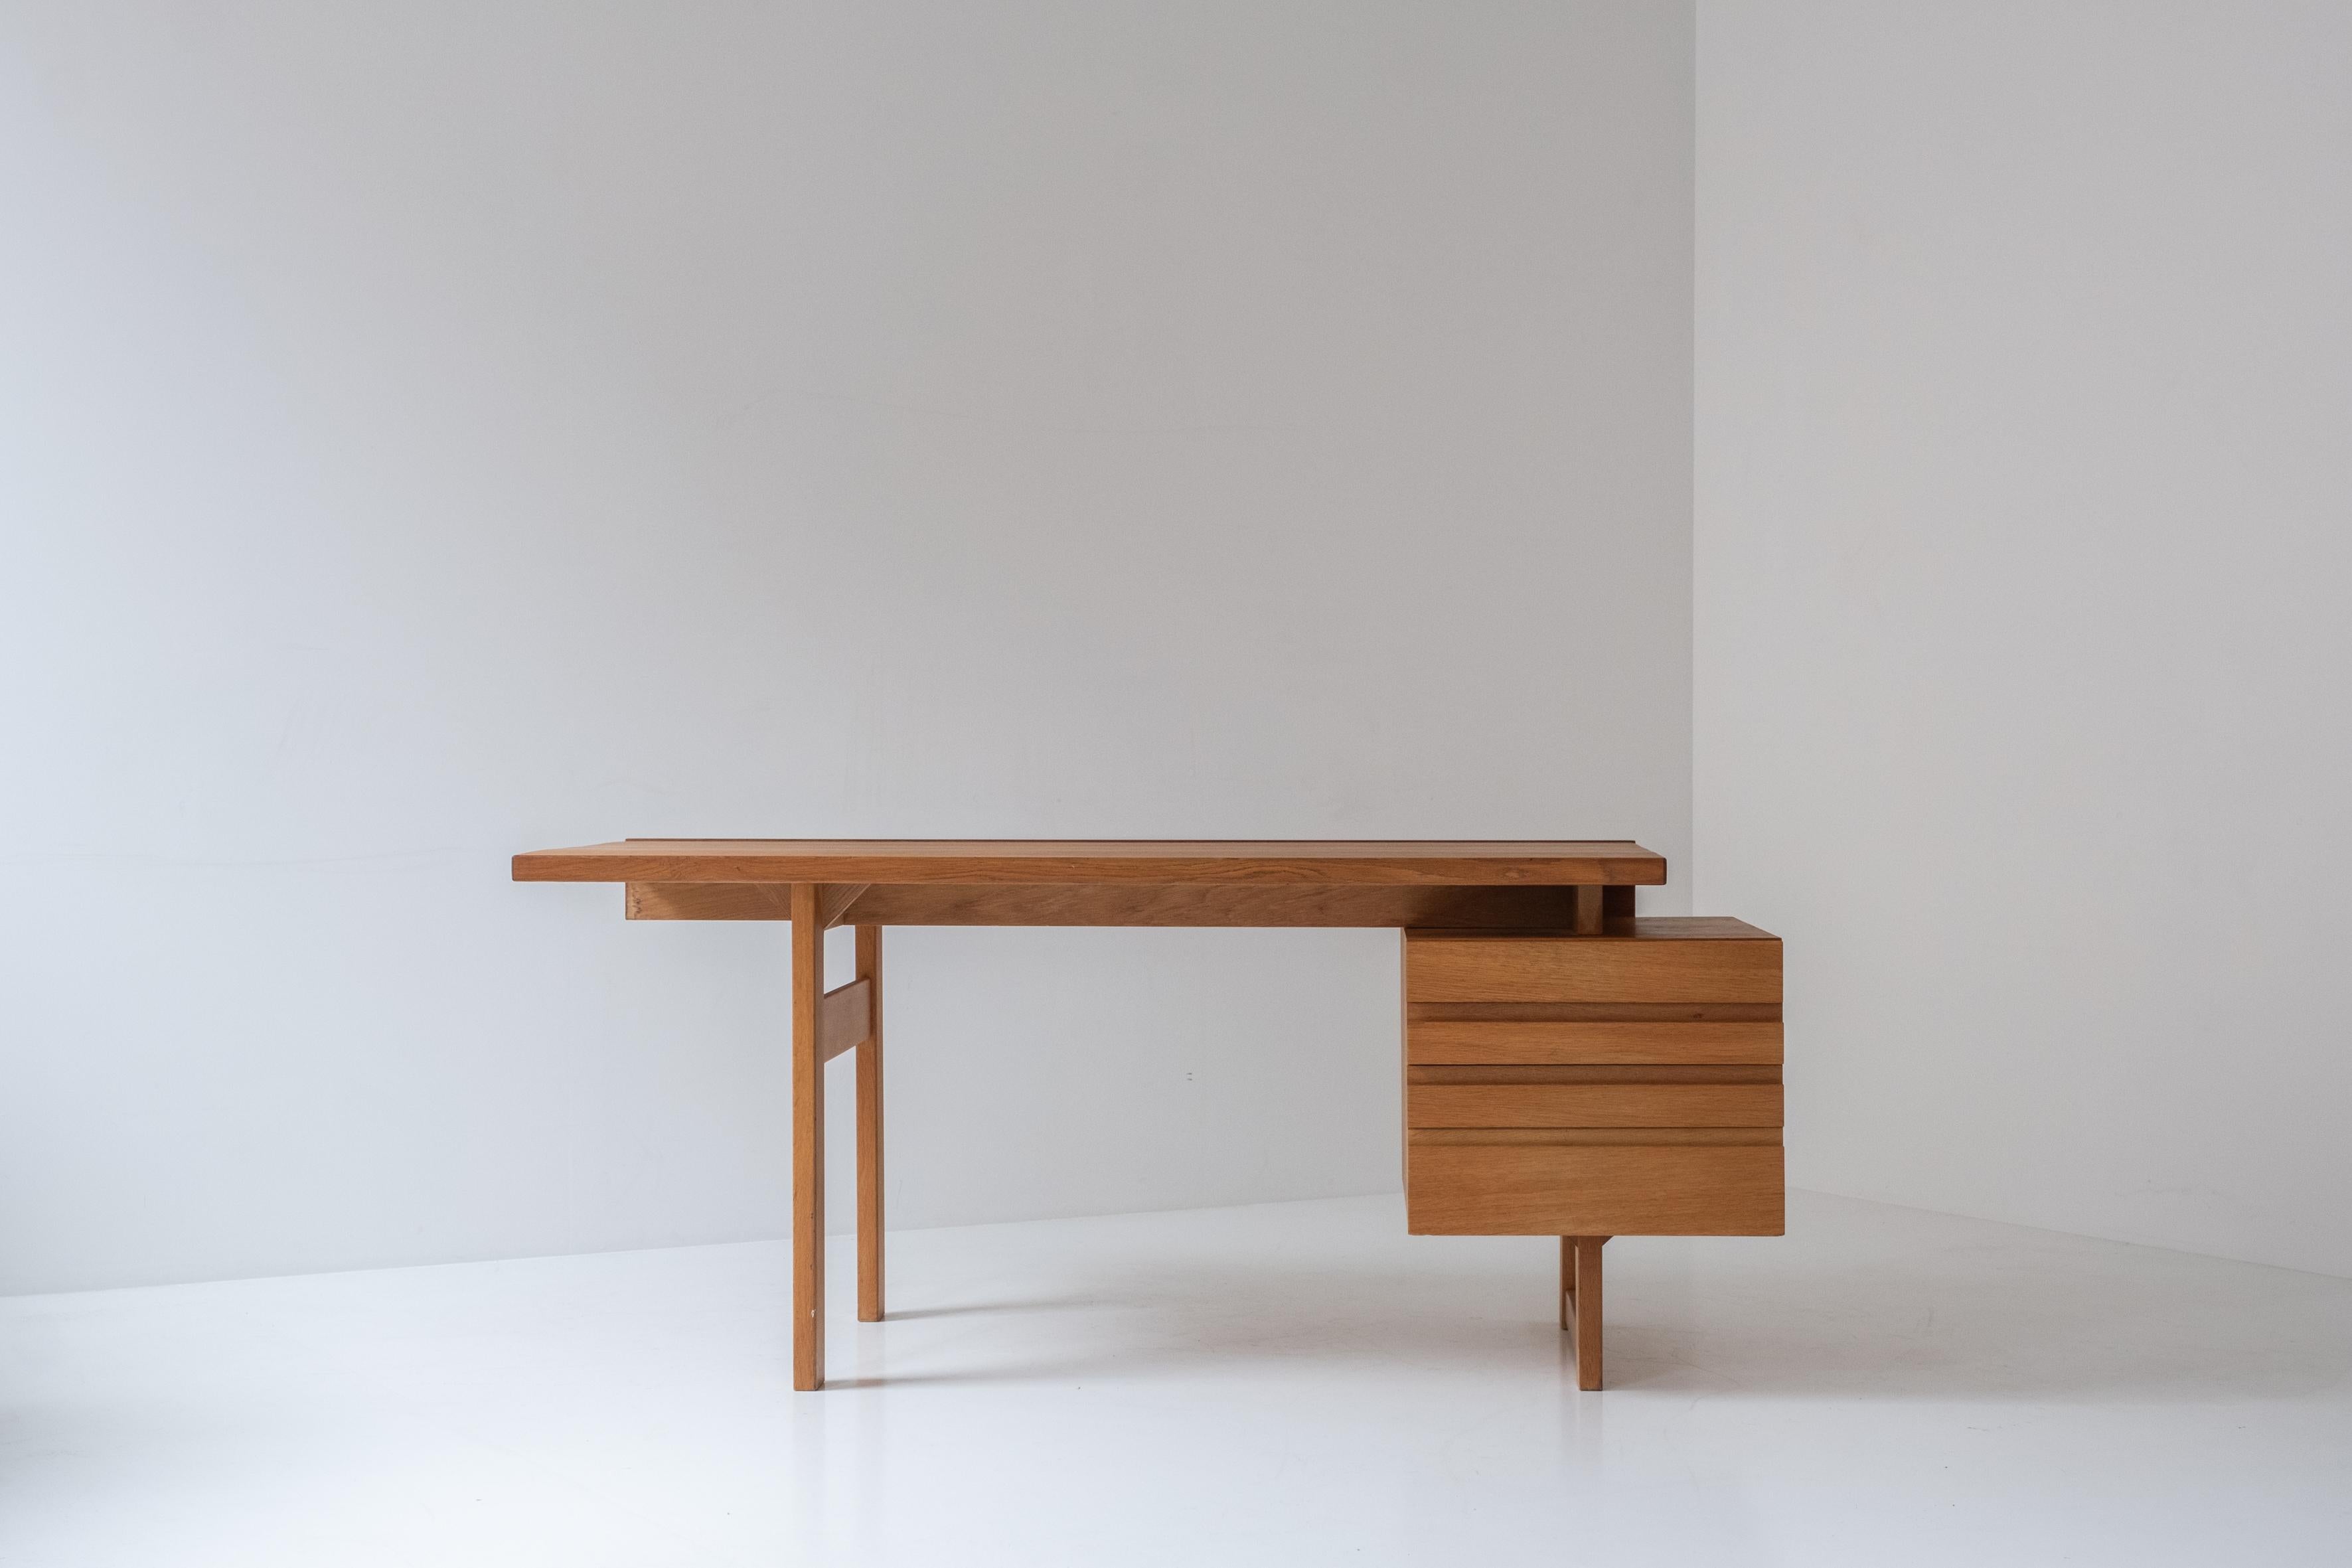 ‘Paletti’ desk by Olavi Hanninen for Mikko Nupponen, Finland 1960’s. This asymmetrical free standing desk is made out of oak and features a series of four drawers. Some age related marks, but overall in a good condition.